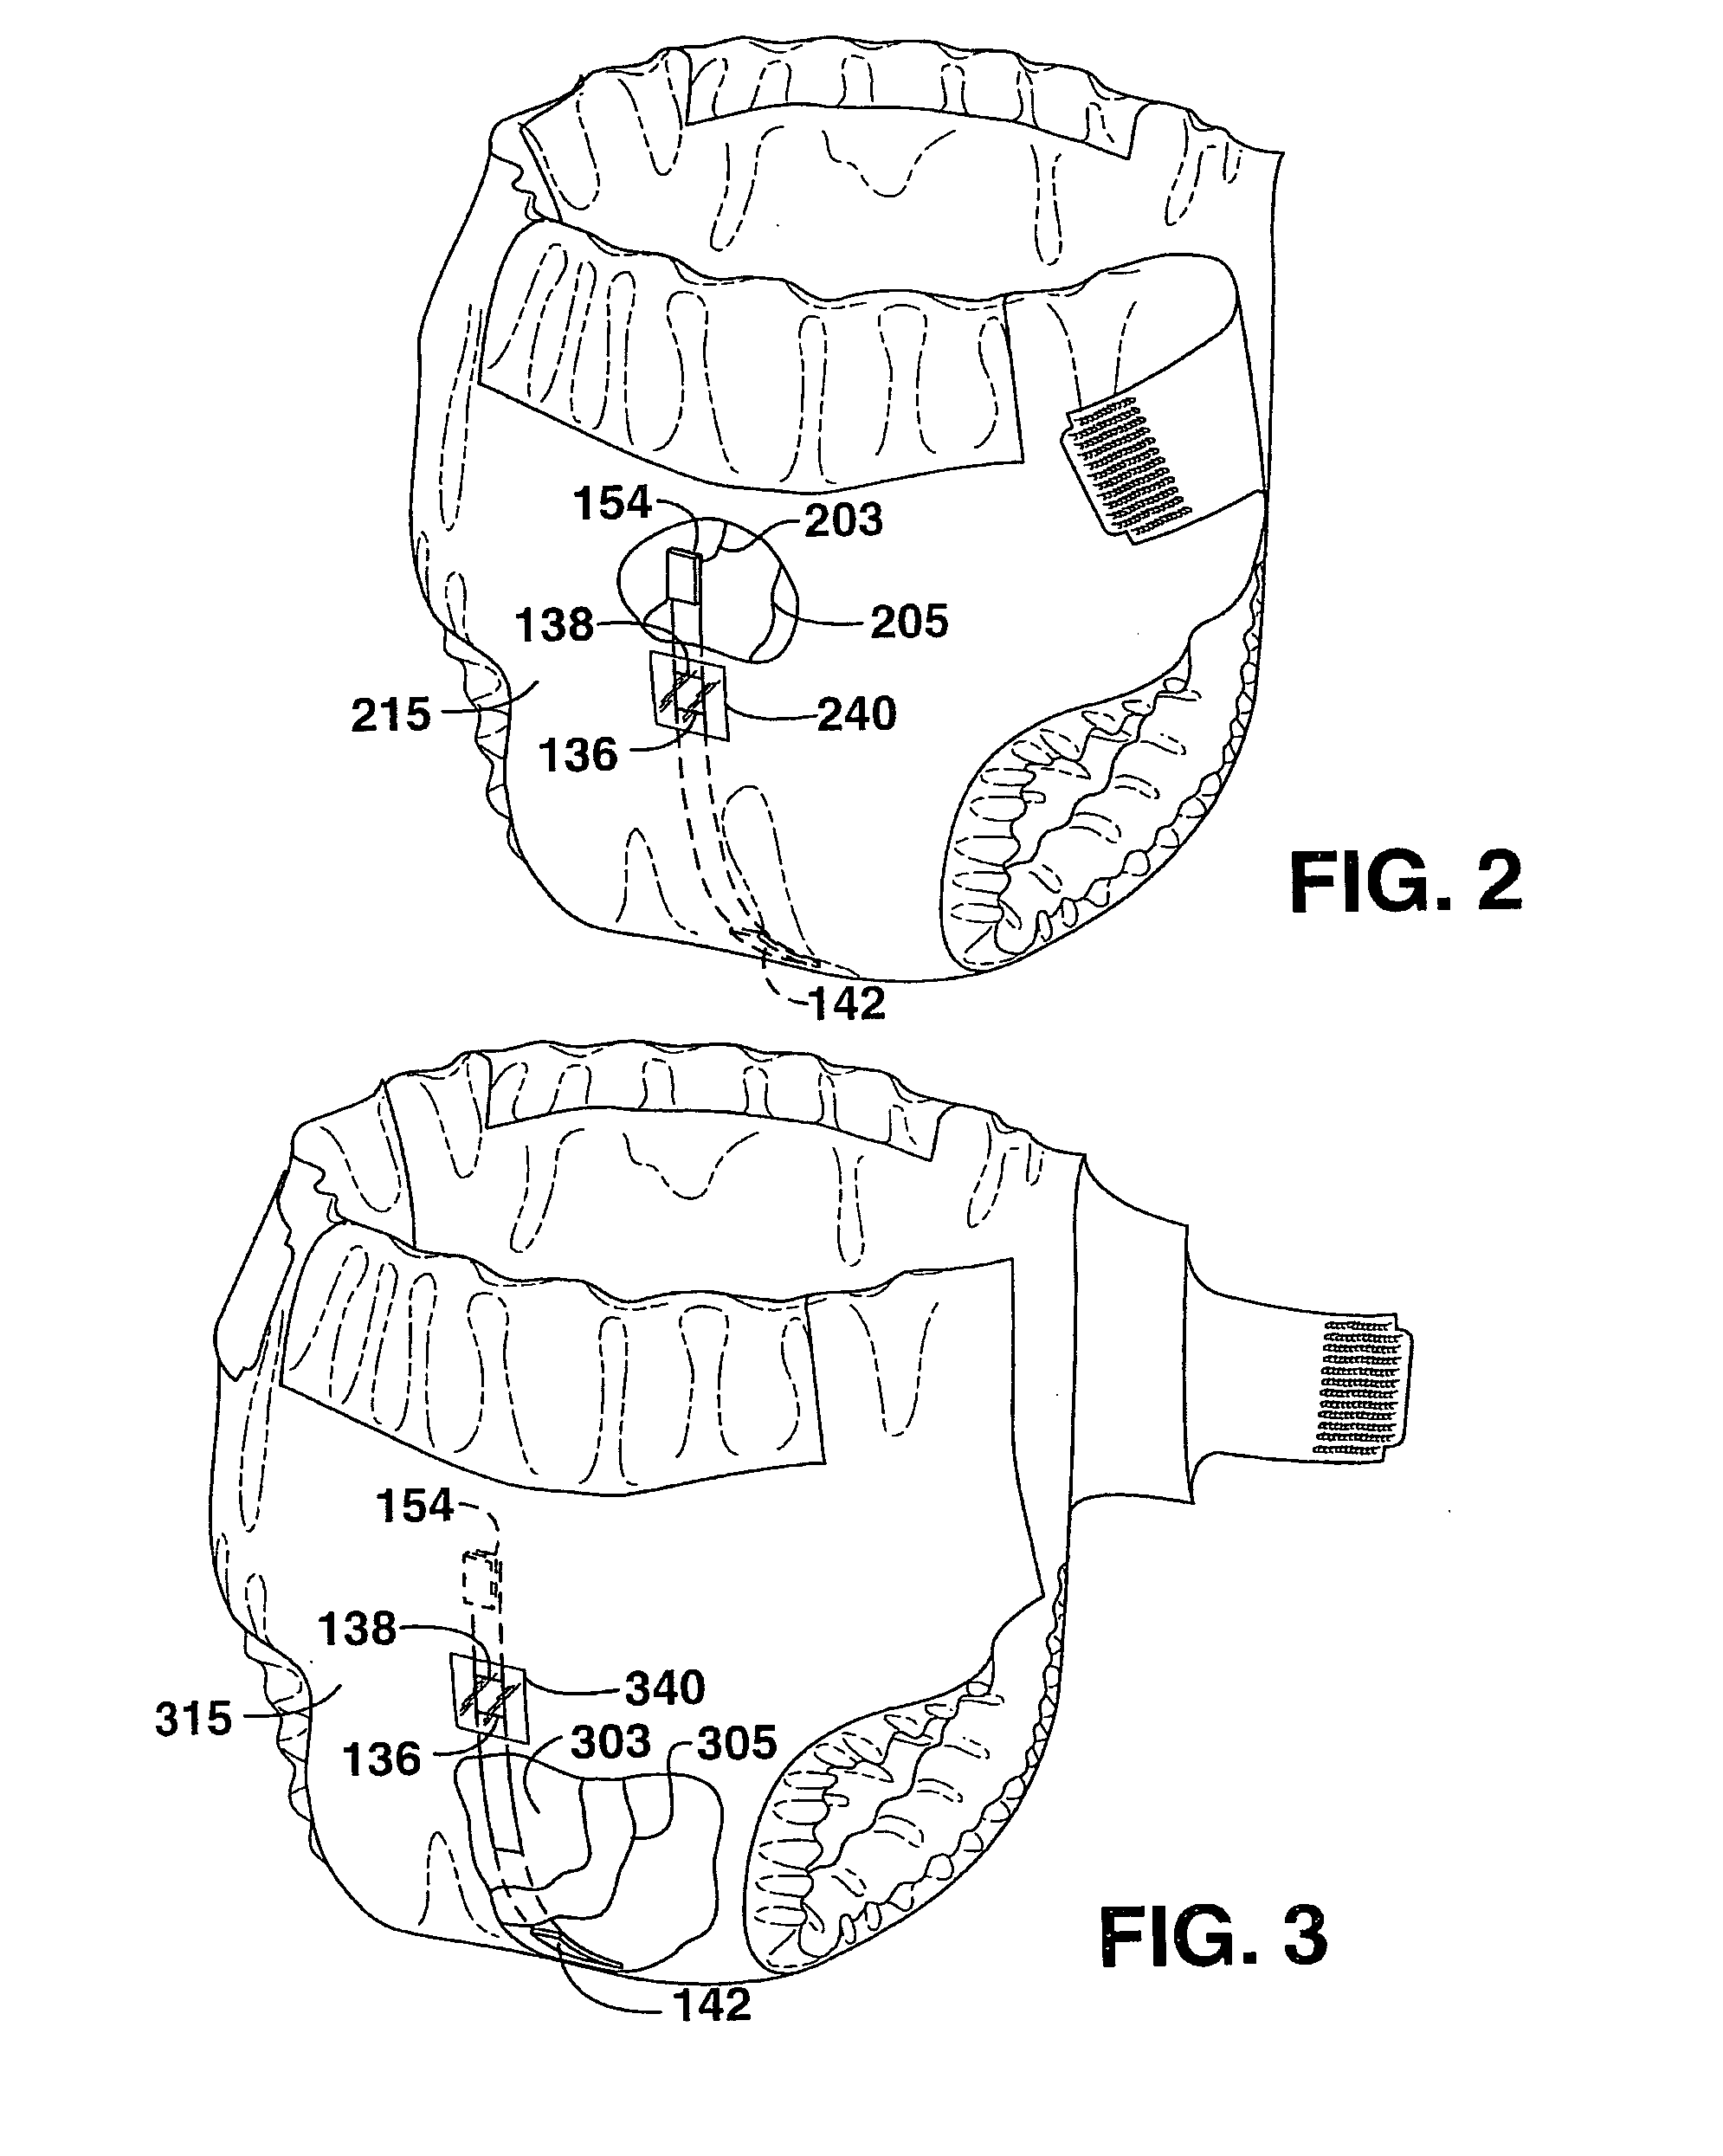 Absorbent article containing lateral flow assay device